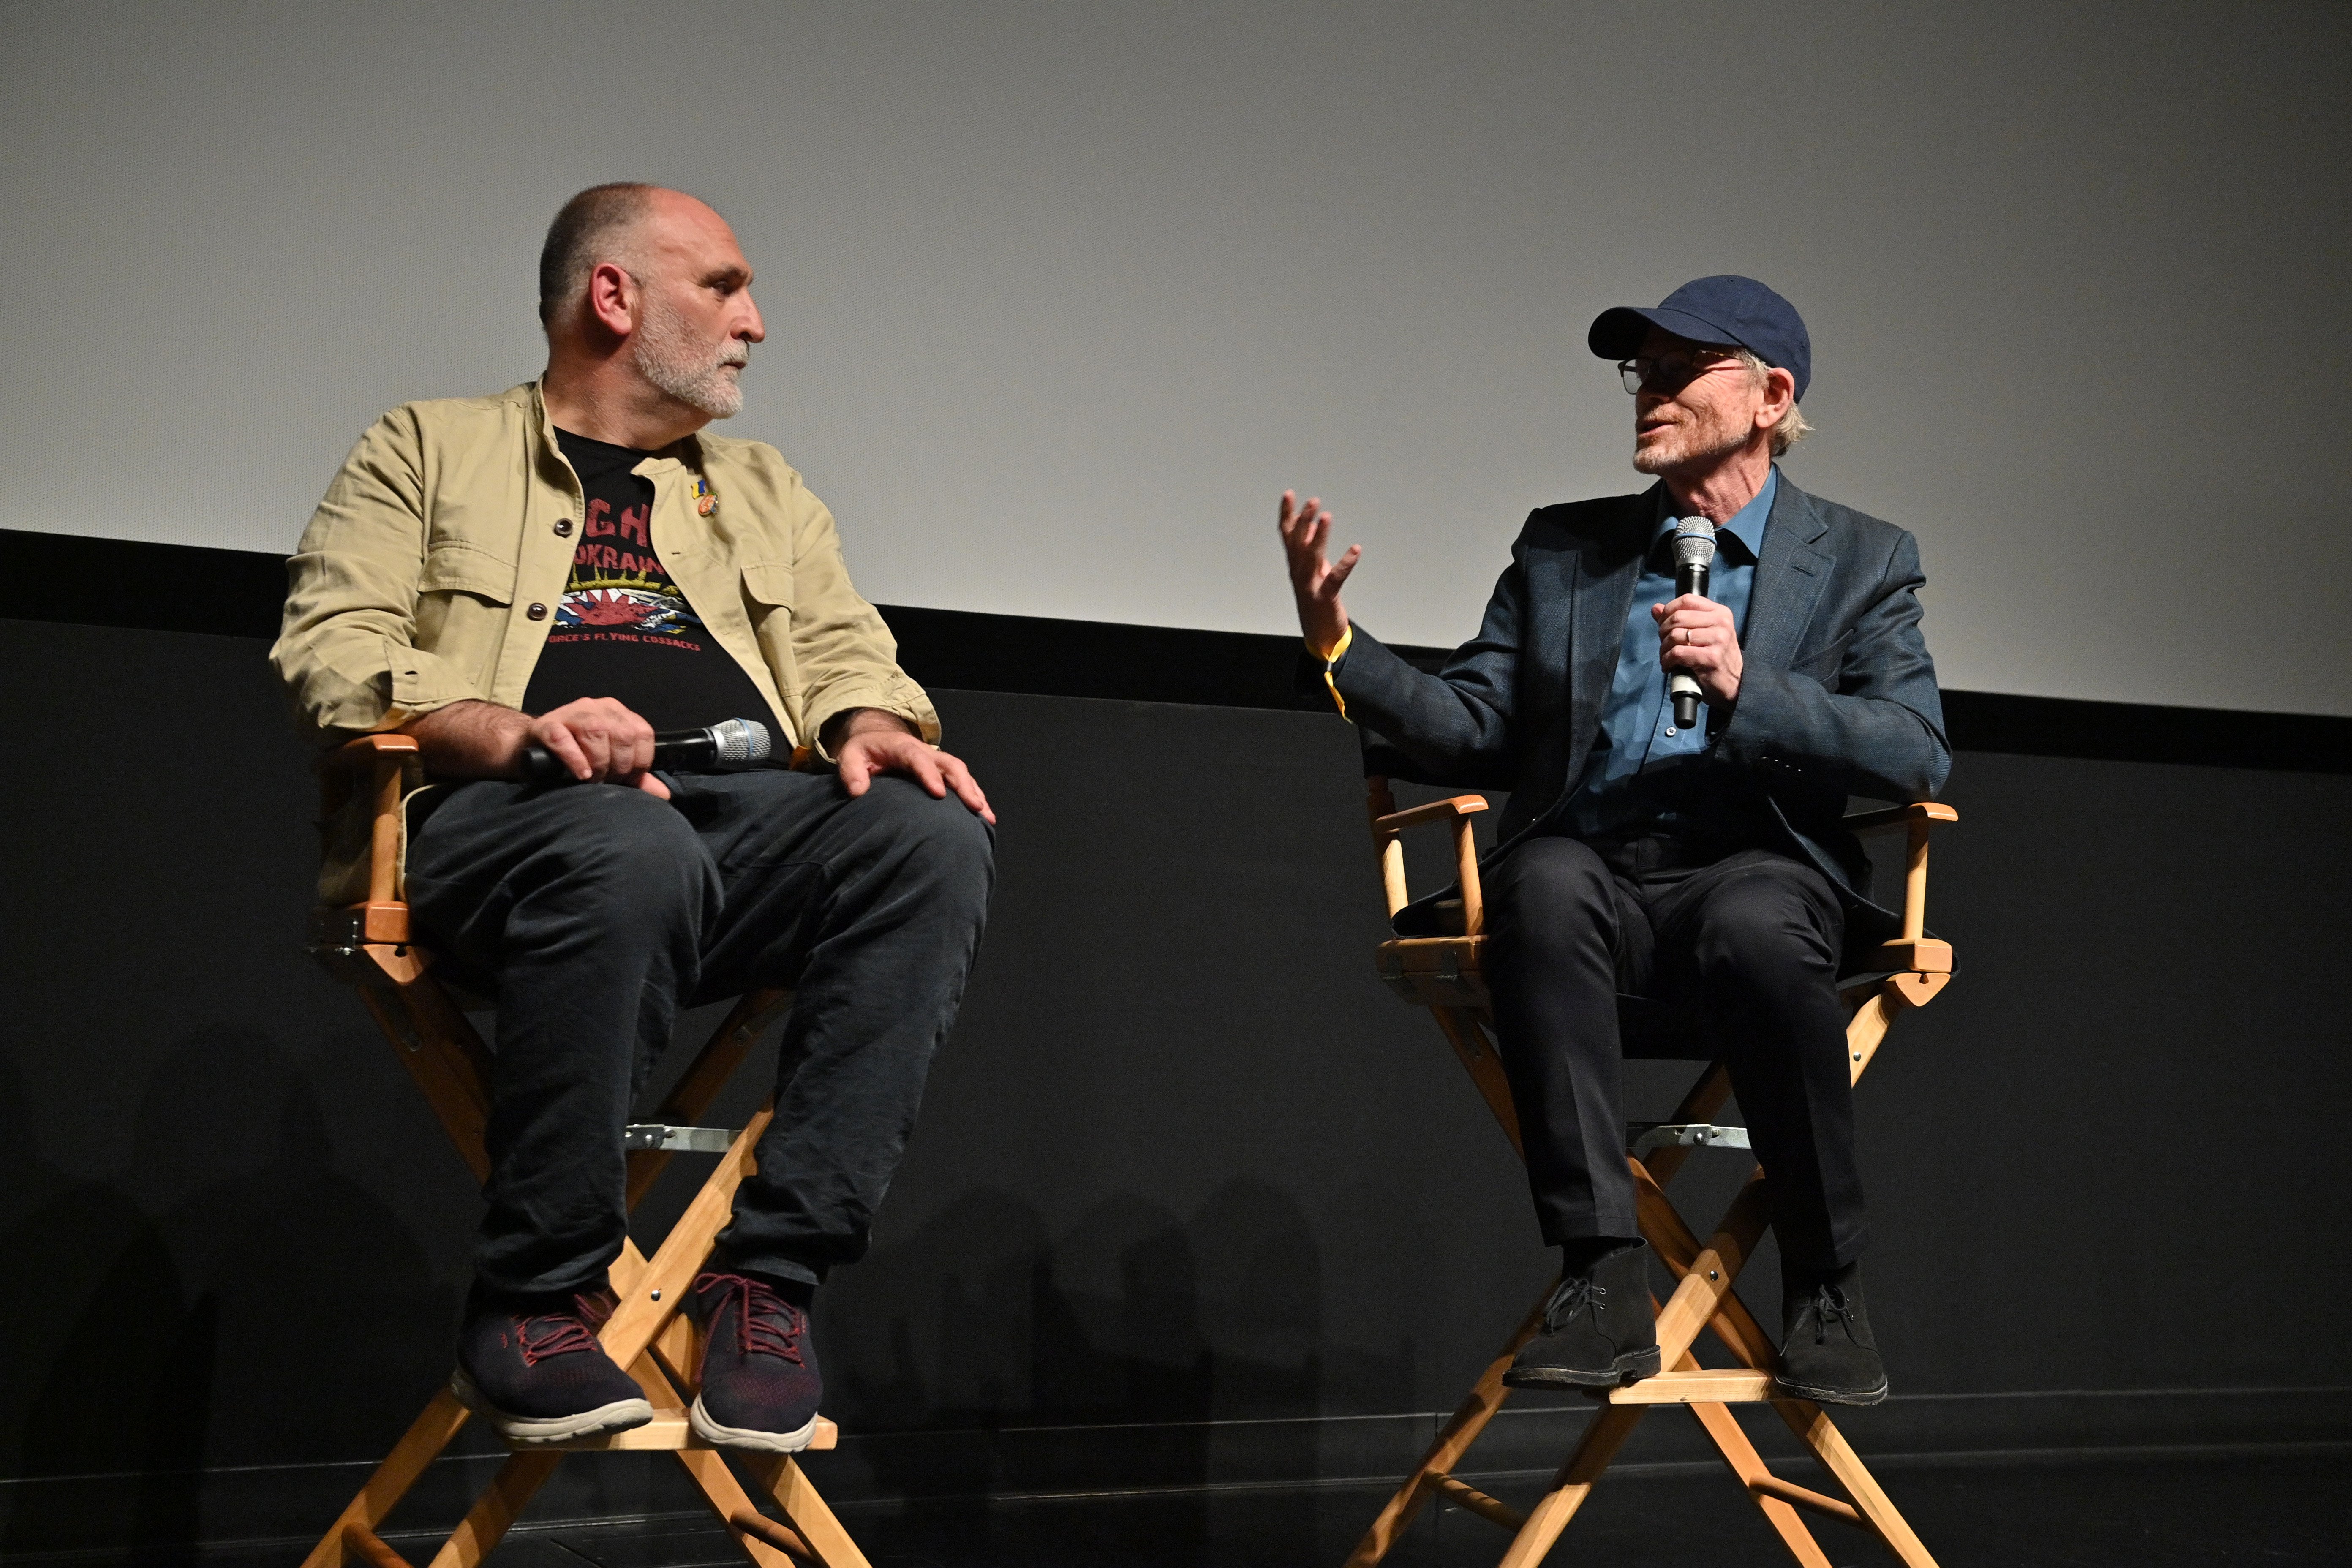 Jose Andres and Ron Howard participate in a Q&A session during National Geographic Documentary Films' WE FEED PEOPLE New York Premiere at SVA Theater on May 03, 2022 in New York City. | Source: Getty Images